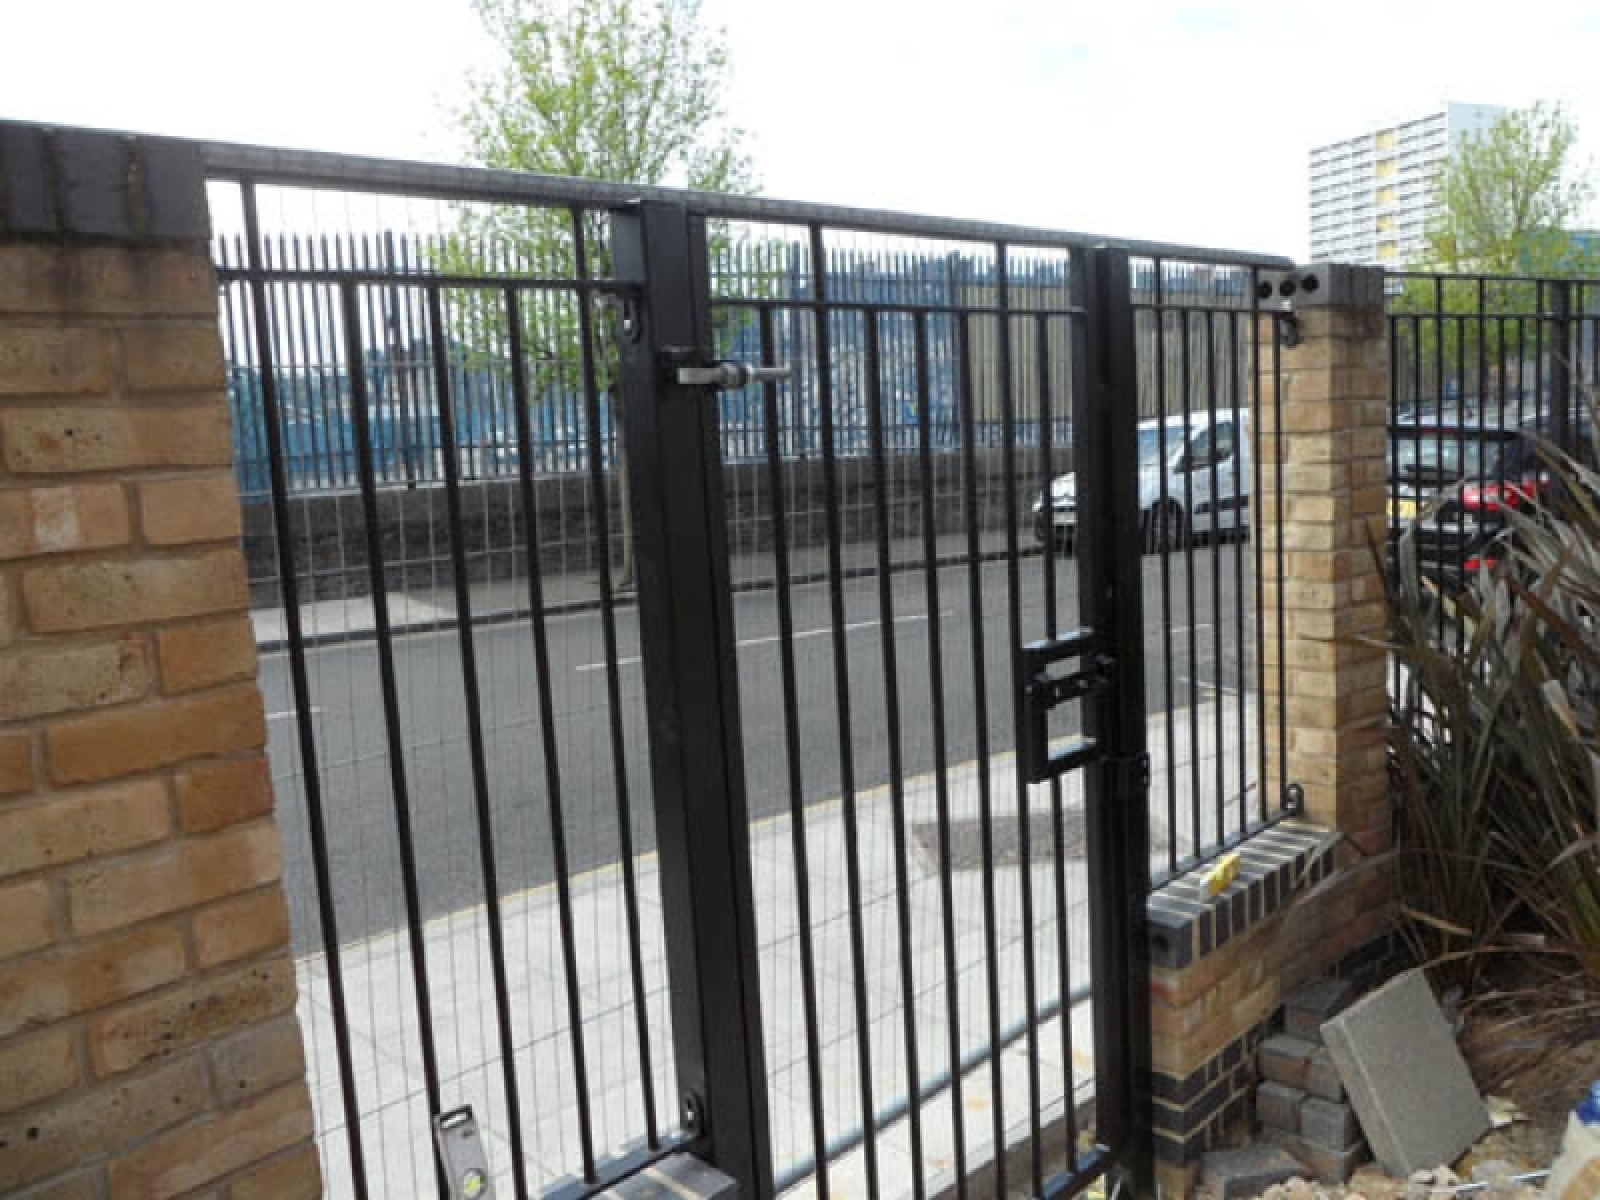 Caspian Wharf capped off with stylish railings